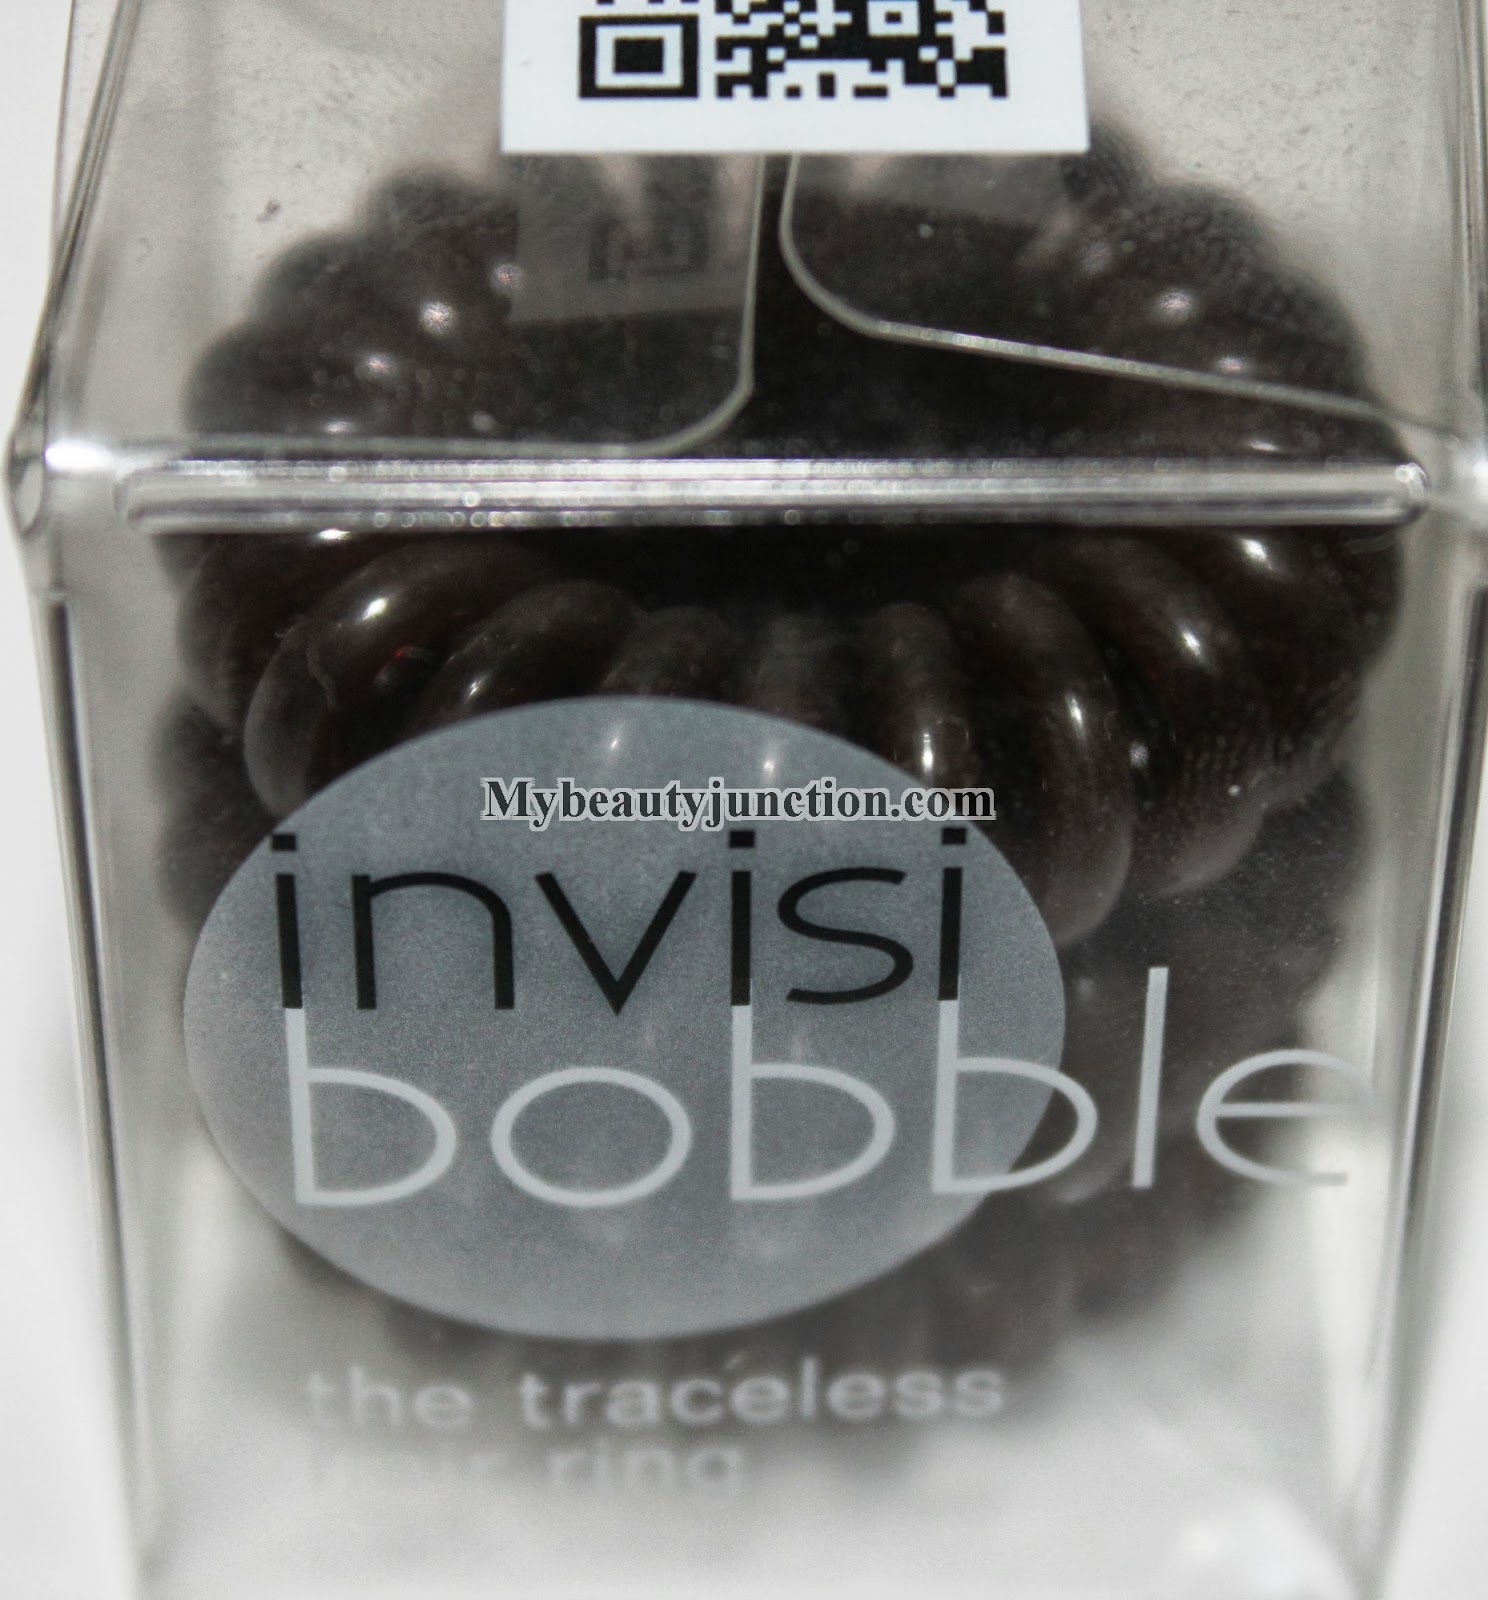 Review and how to use Invisibobble hair tie bobble